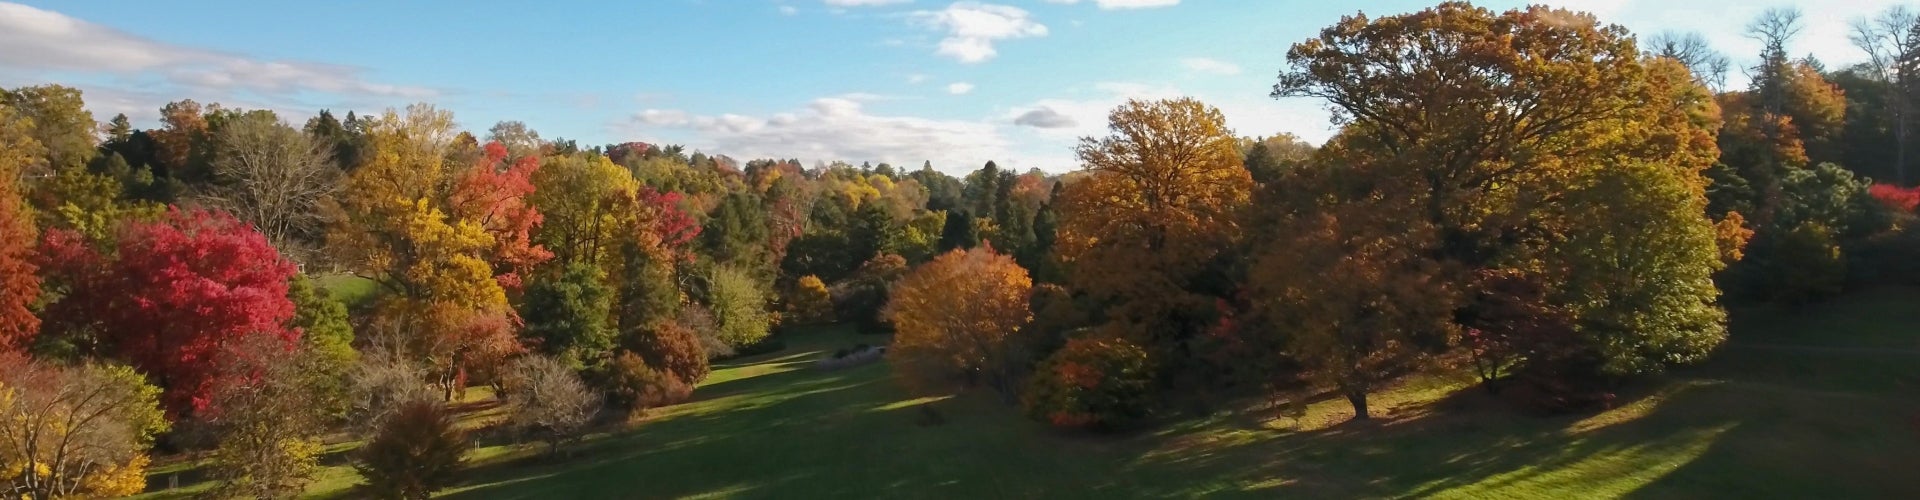 view of trees with fall foliage colors